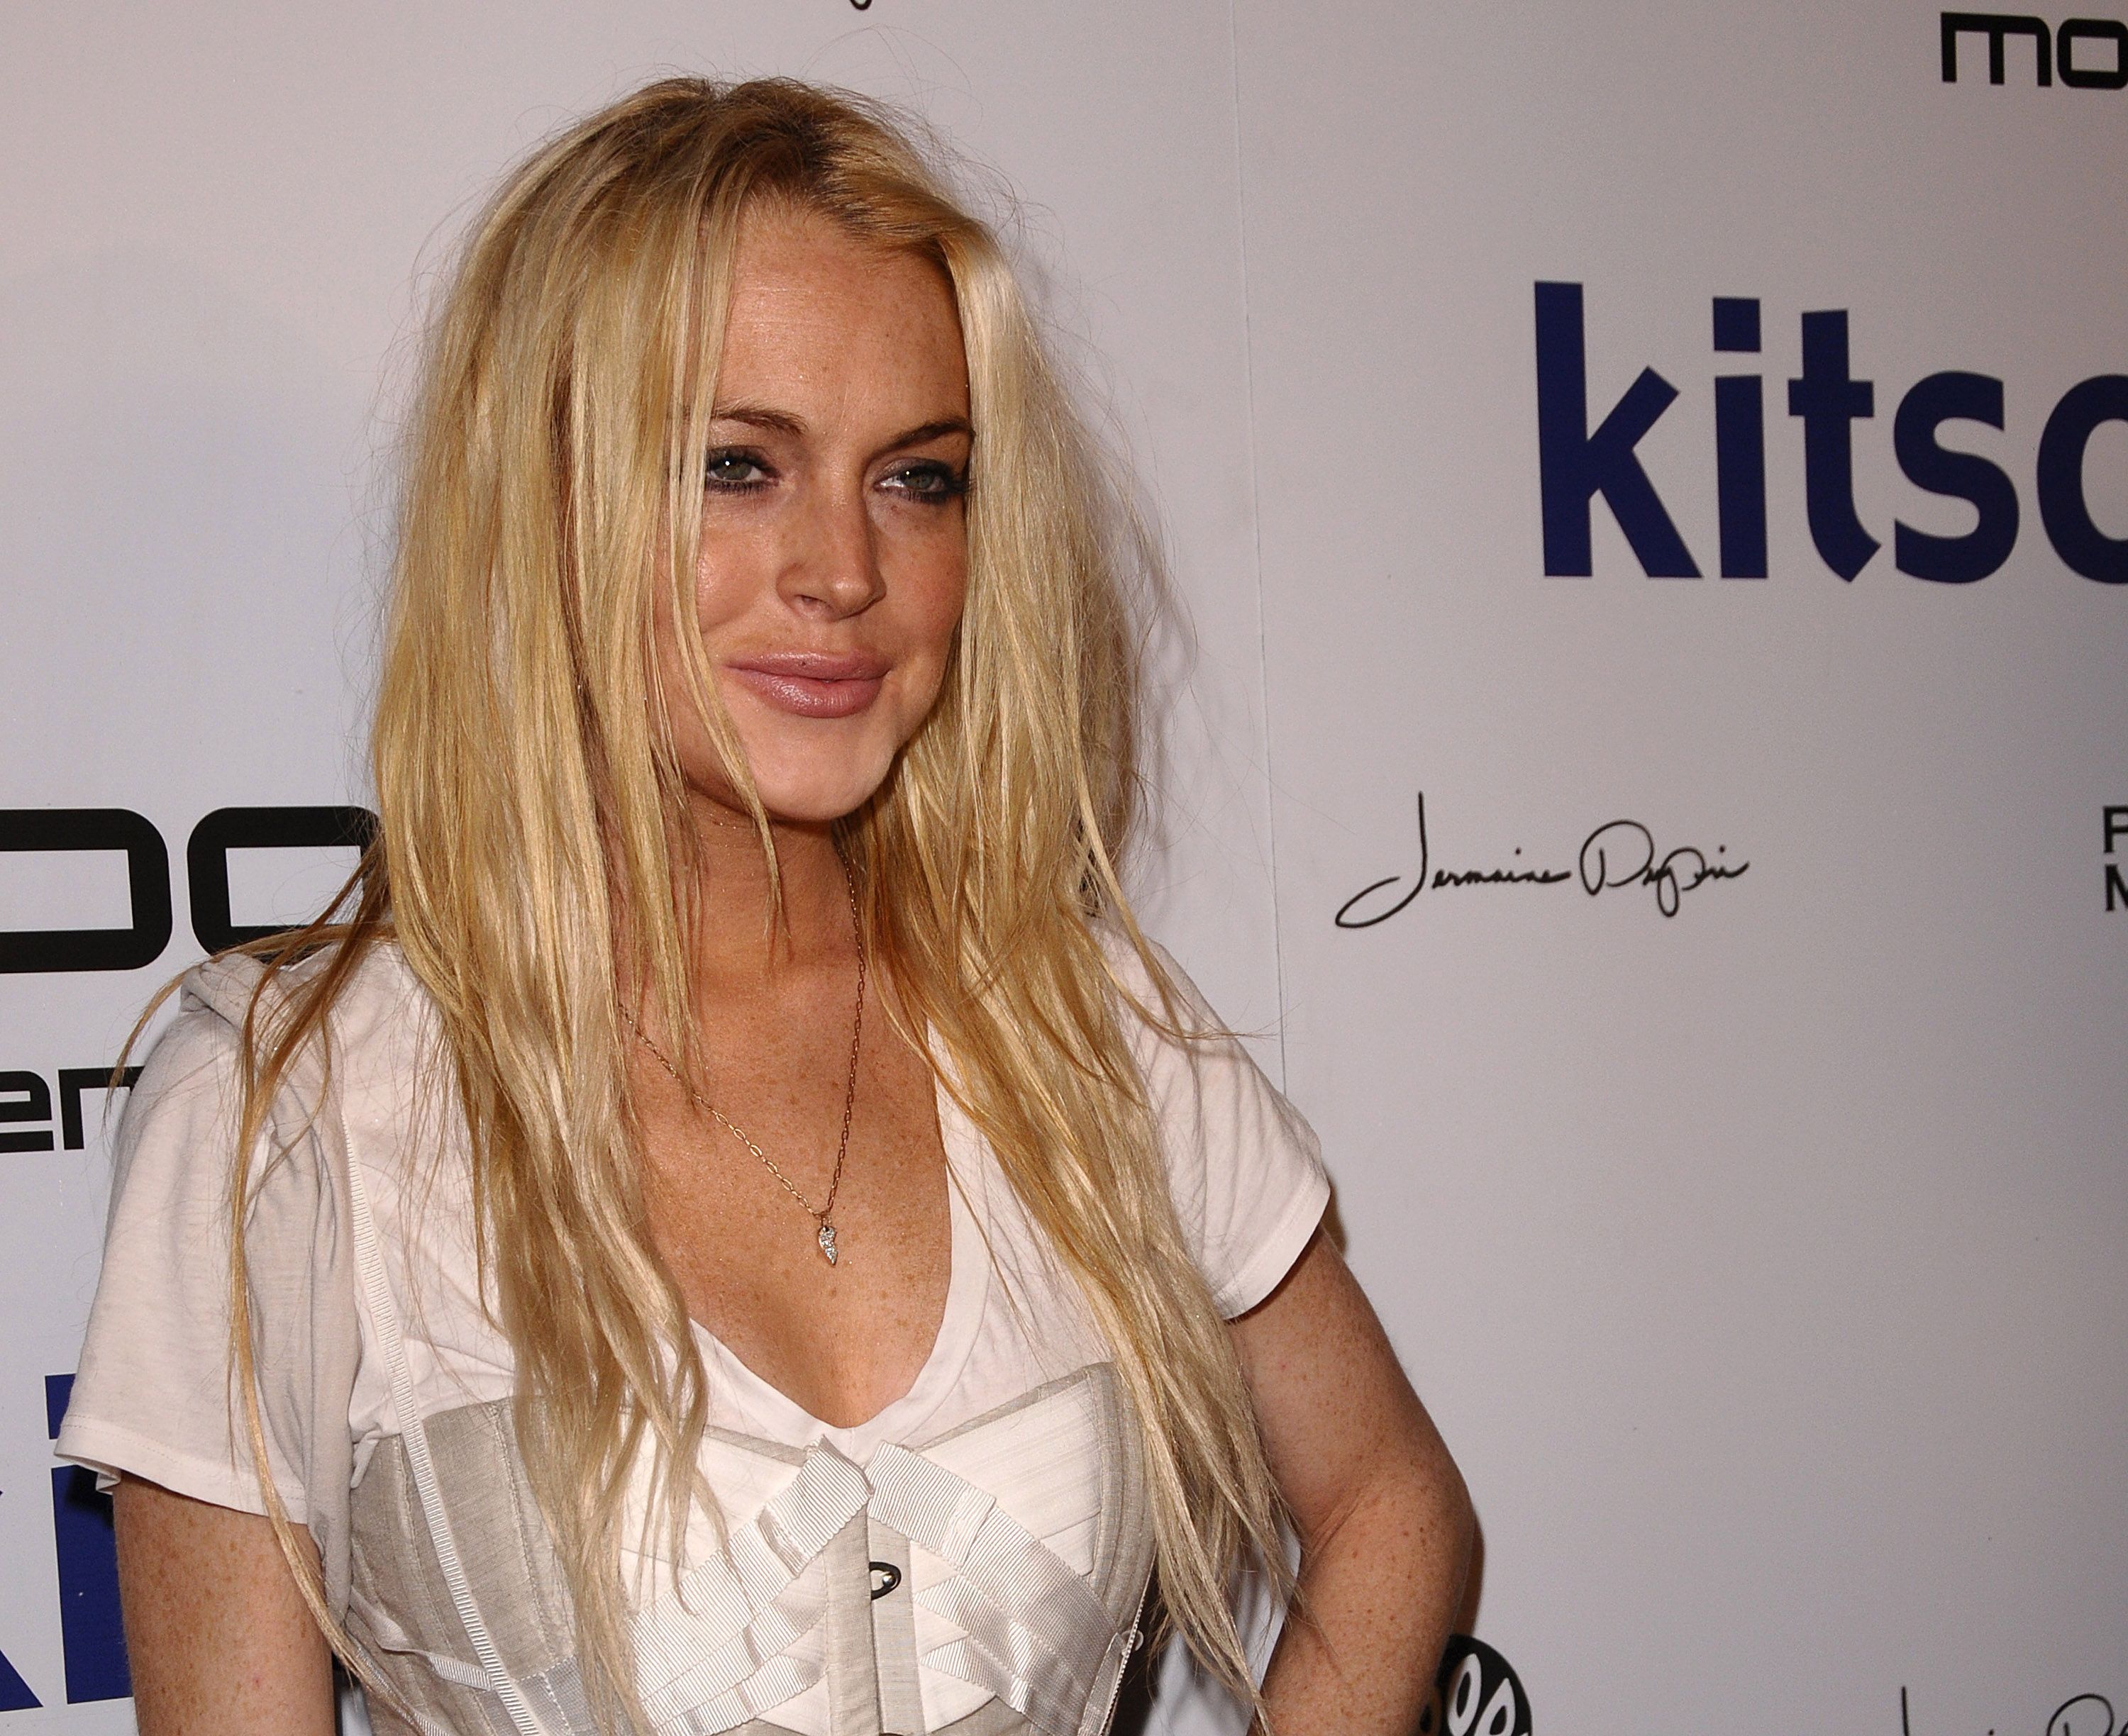 Lindsay Lohan at the Nu Pop Movement Watch launch party at Kitson Men on November 12, 2009 in West Hollywood, California. | Source: Getty Images